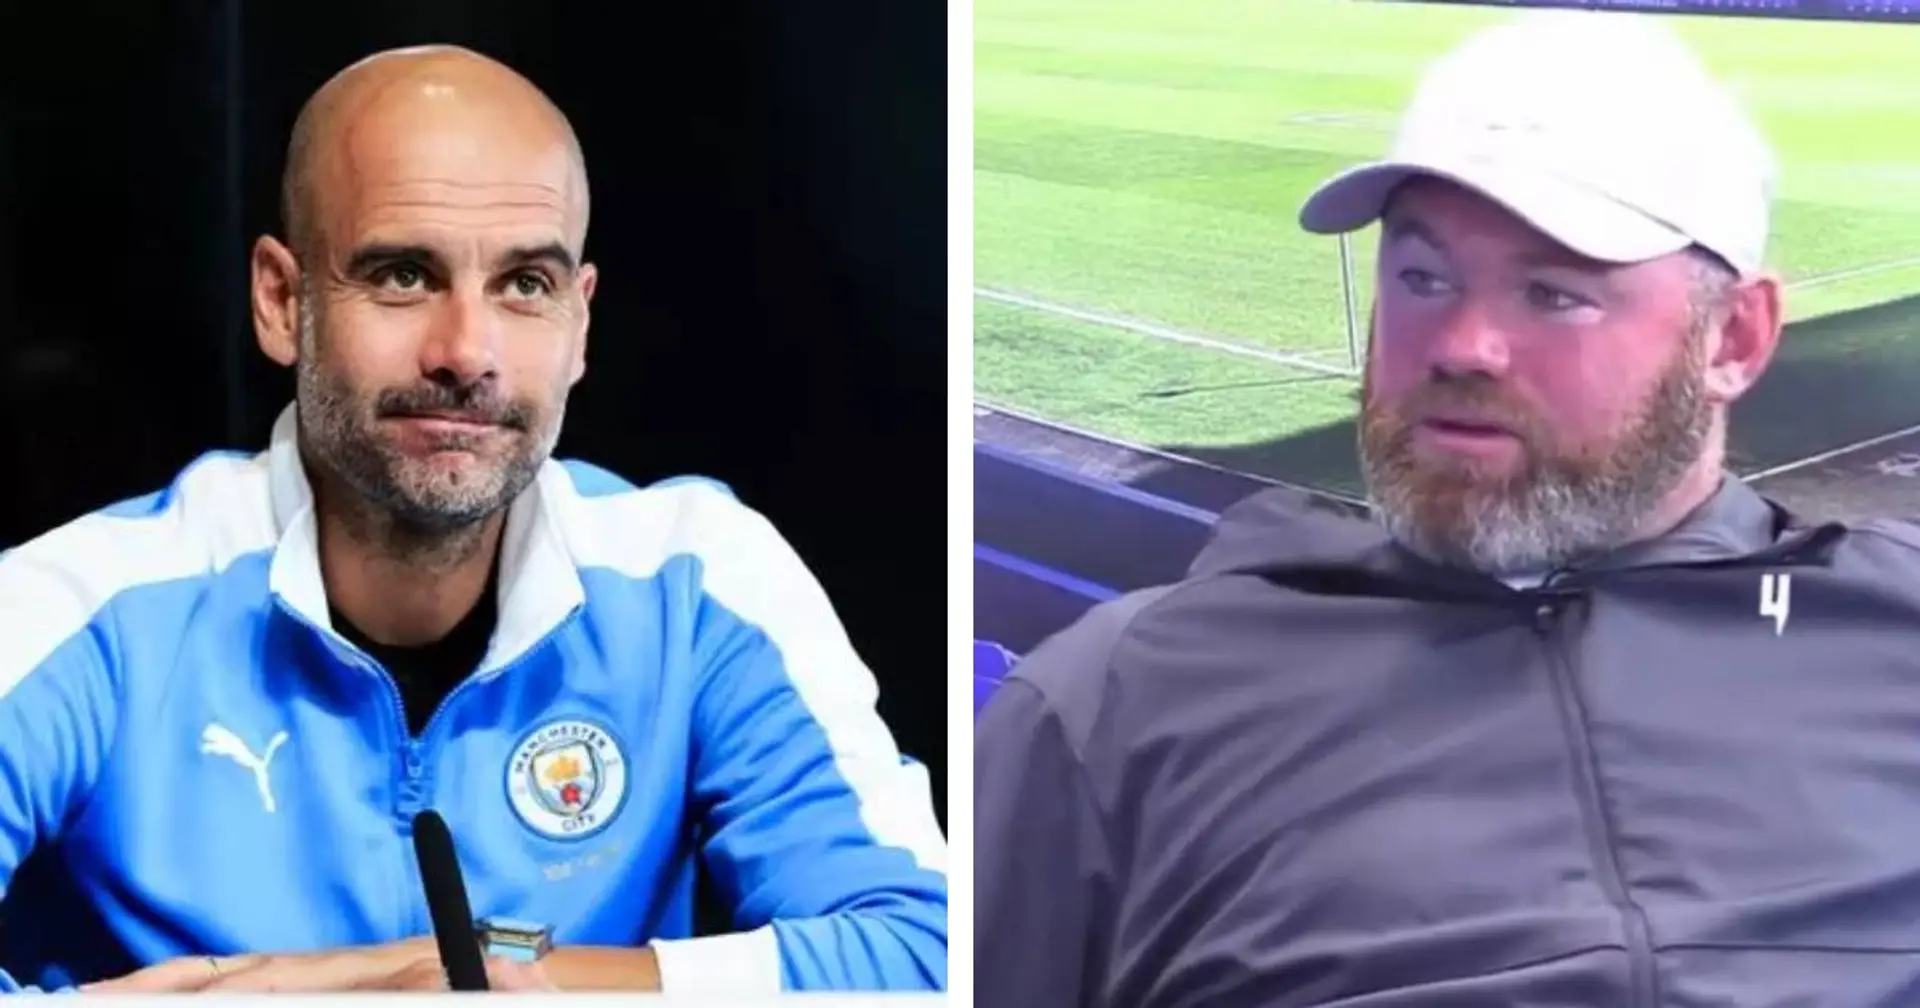 Wayne Rooney: 'I'd love to have played for Pep Guardiola'